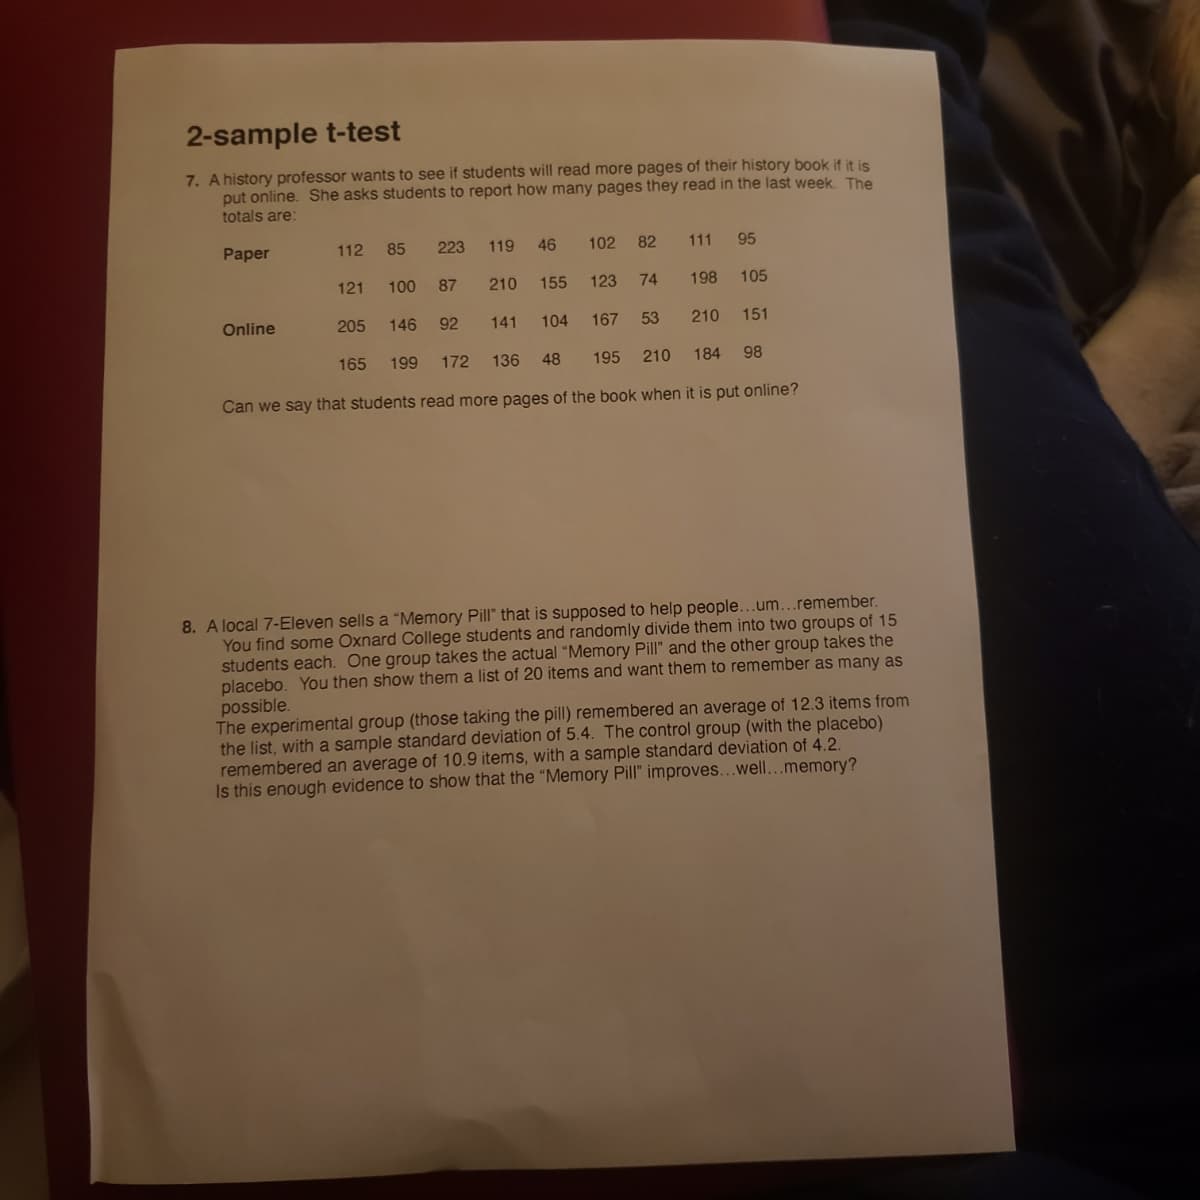 2-sample t-test
7. A history professor wants to see if students will read more pages of their history book if it is
put online. She asks students to report how many pages they read in the last week. The
totals are:
Paper
112
85
223
119
46
102
82
111
95
121
100
87
210
155
123
74
198
105
Online
205
146
92
141
104
167
53
210
151
165
199
172
136
48
195
210
184
98
Can we say that students read more pages of the book when it is put online?
8. A local 7-Eleven sells a “Memory Pill" that is supposed to help people...um...remember.
You find some Oxnard College students and randomly divide them into two groups of 15
students each. One group takes the actual "Memory Pill" and the other group takes the
placebo. You then show them a list of 20 items and want them to remember as many as
possible.
The experimental group (those taking the pill) remembered an average of 12.3 items from
the list, with a sample standard deviation of 5.4. The control group (with the placebo)
remembered an average of 10.9 items, with a sample standard deviation of 4.2.
Is this enough evidence to show that the "Memory Pill" improves...well...memory?
